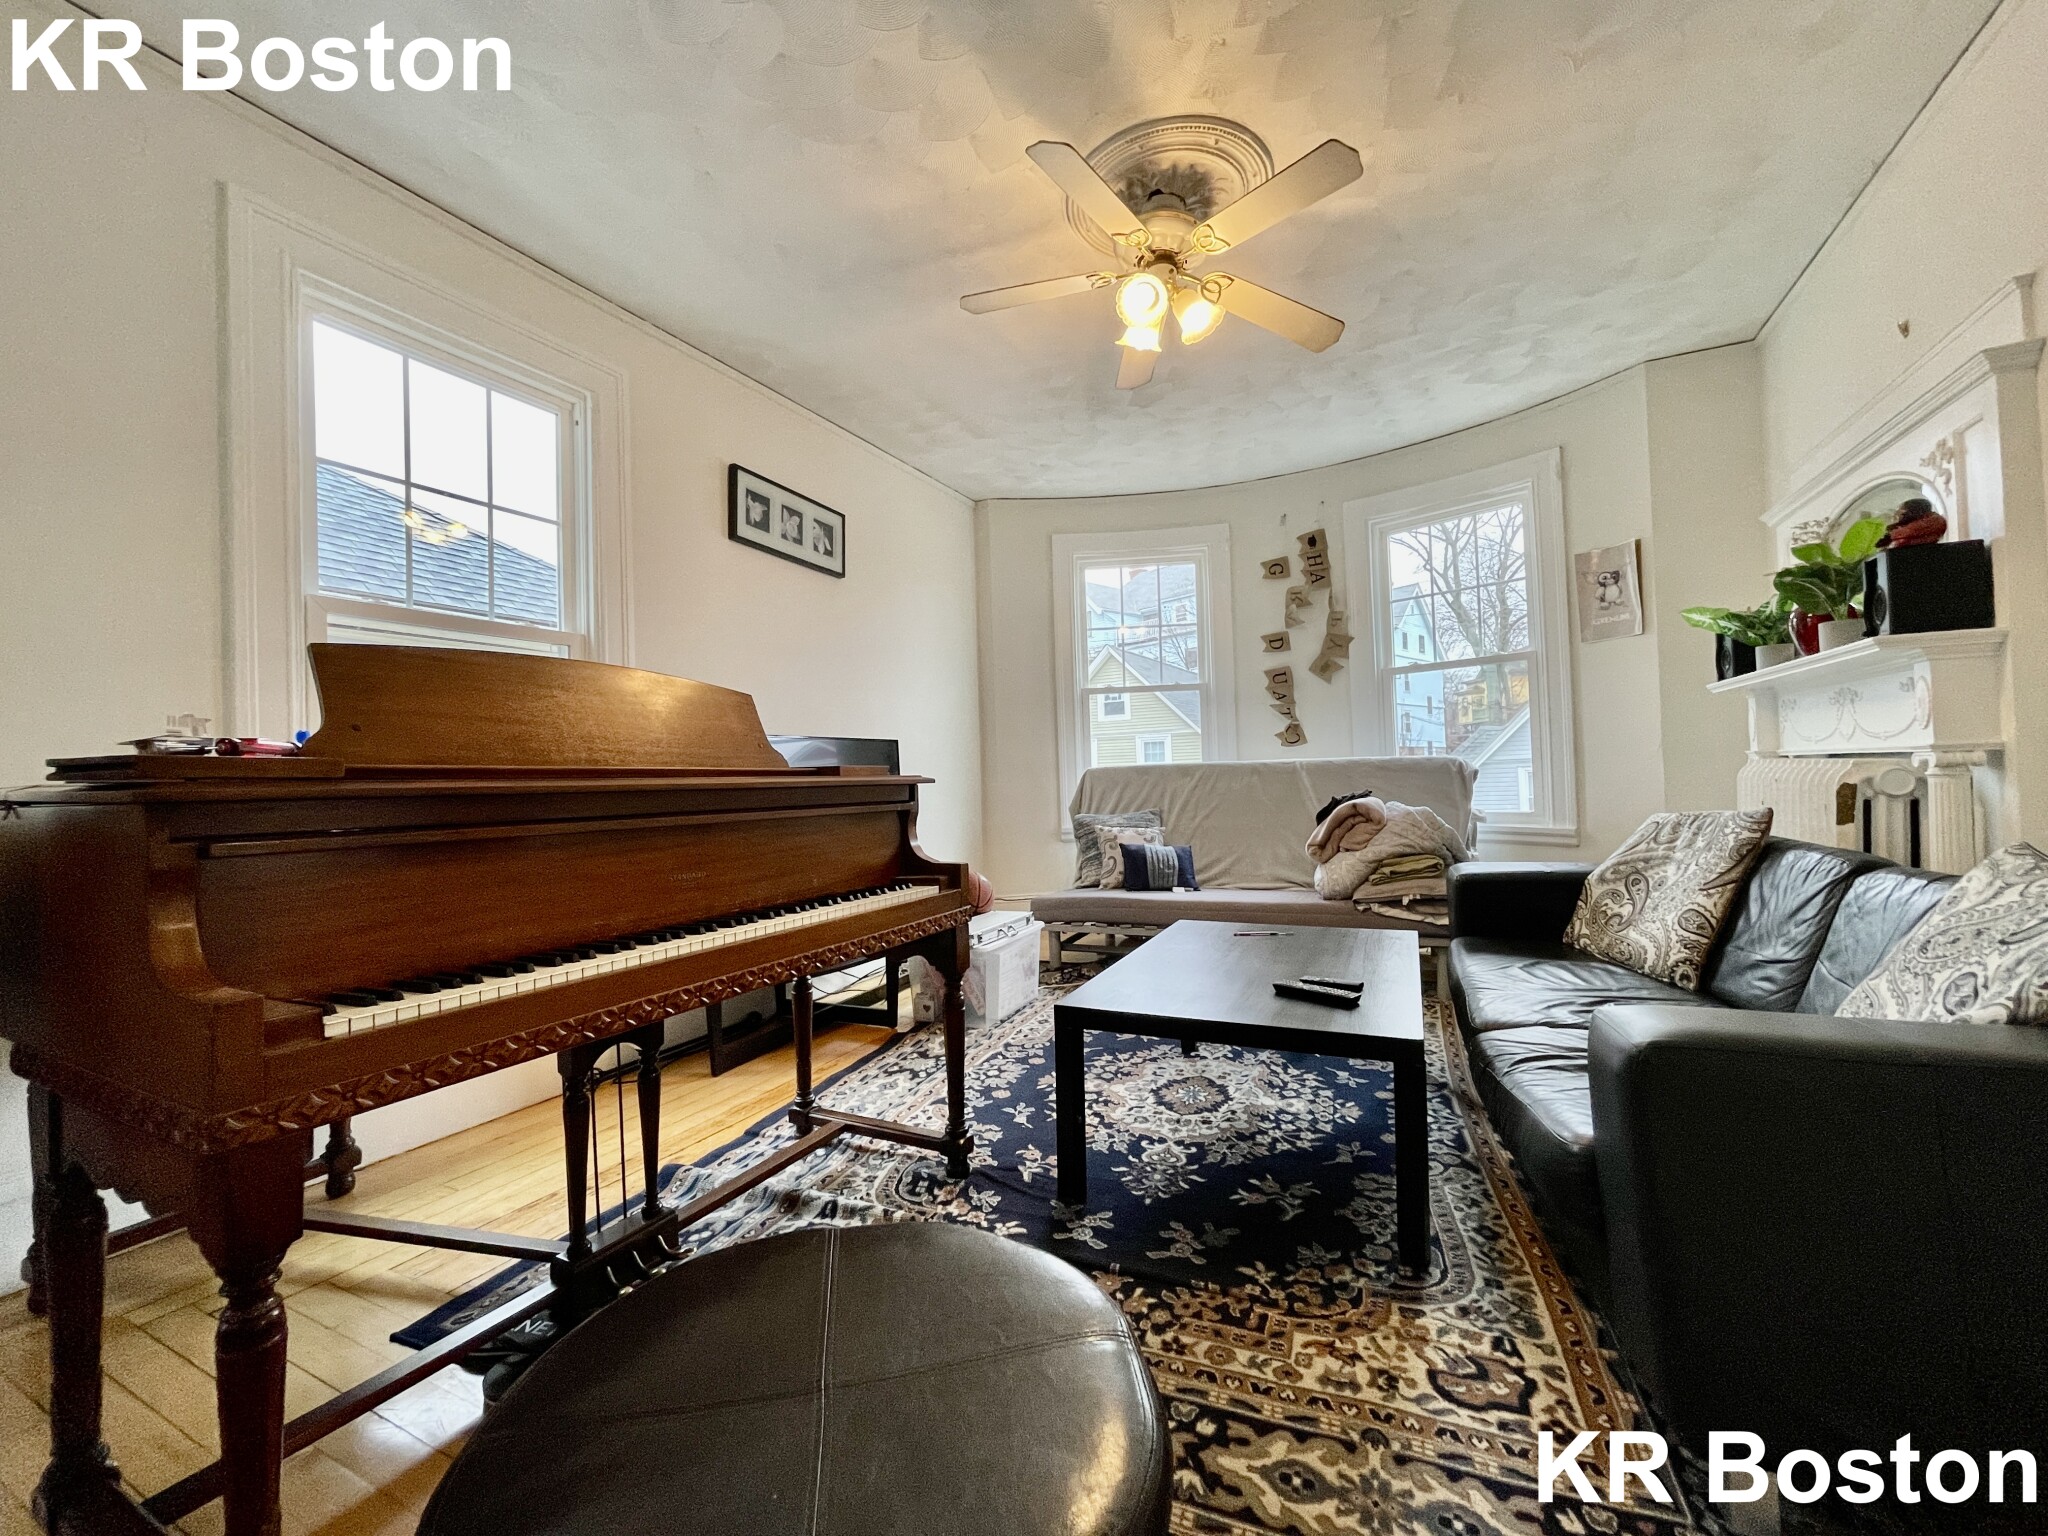 Photos of apartment on Hopedale St.,Boston MA 02134